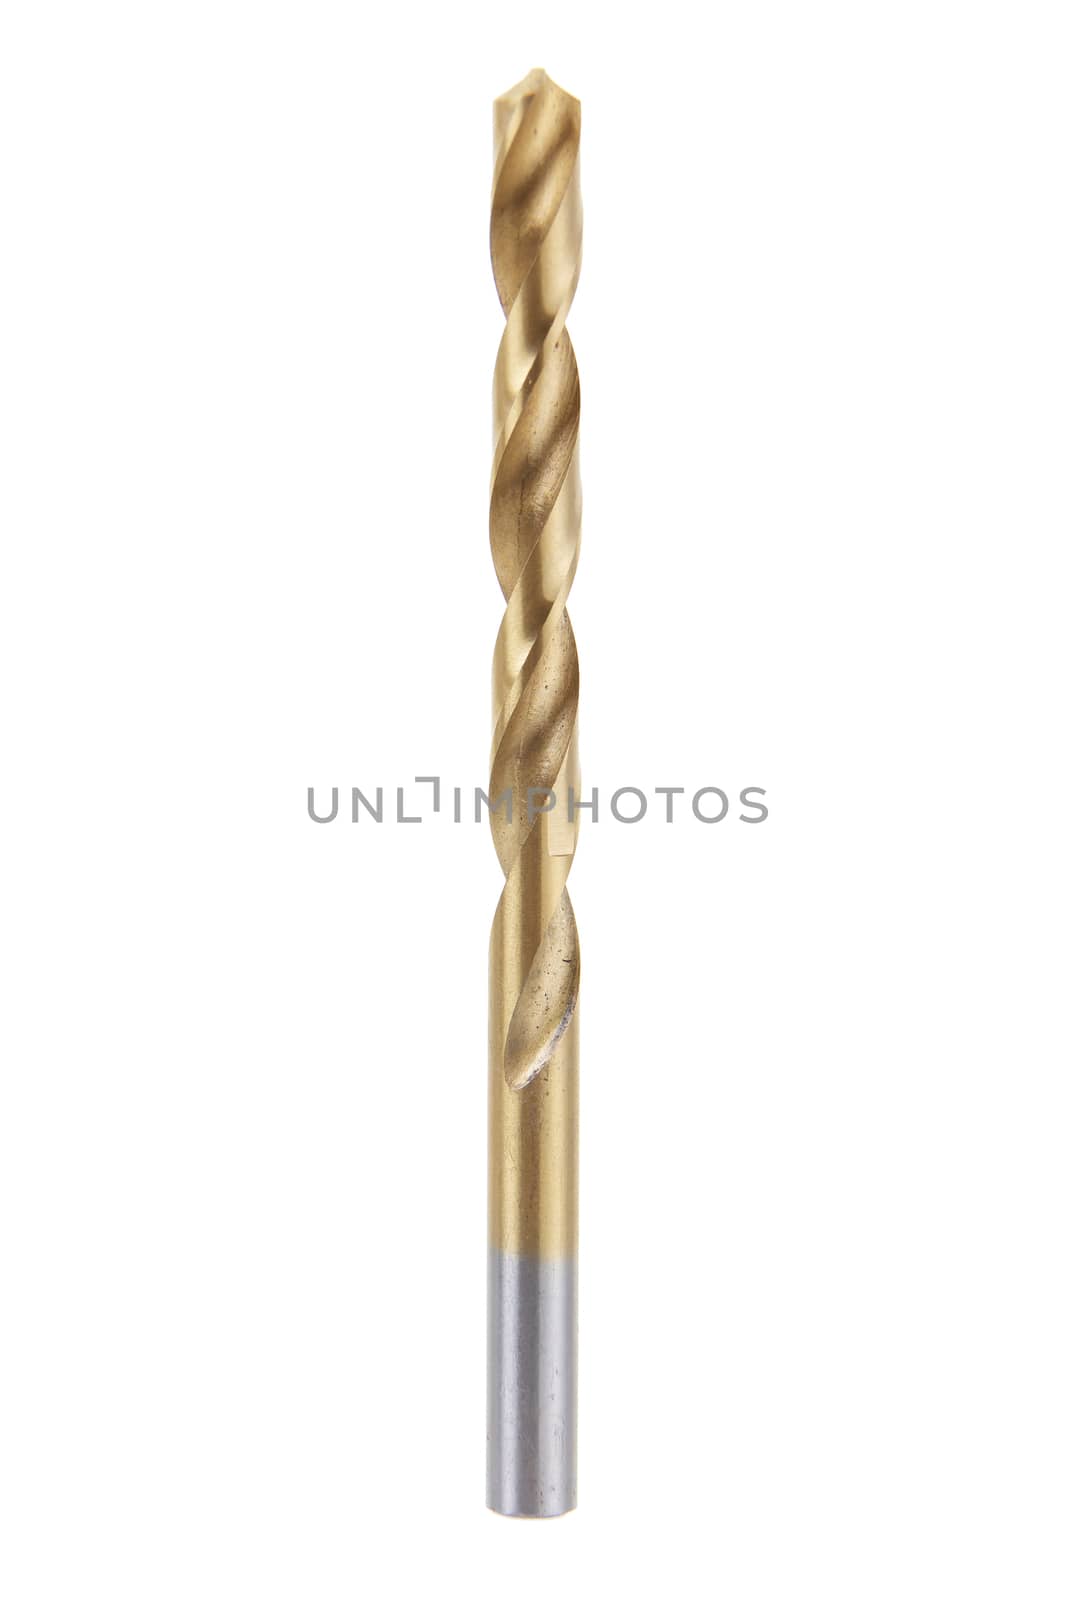 A drill bit isolated on white with clipping path